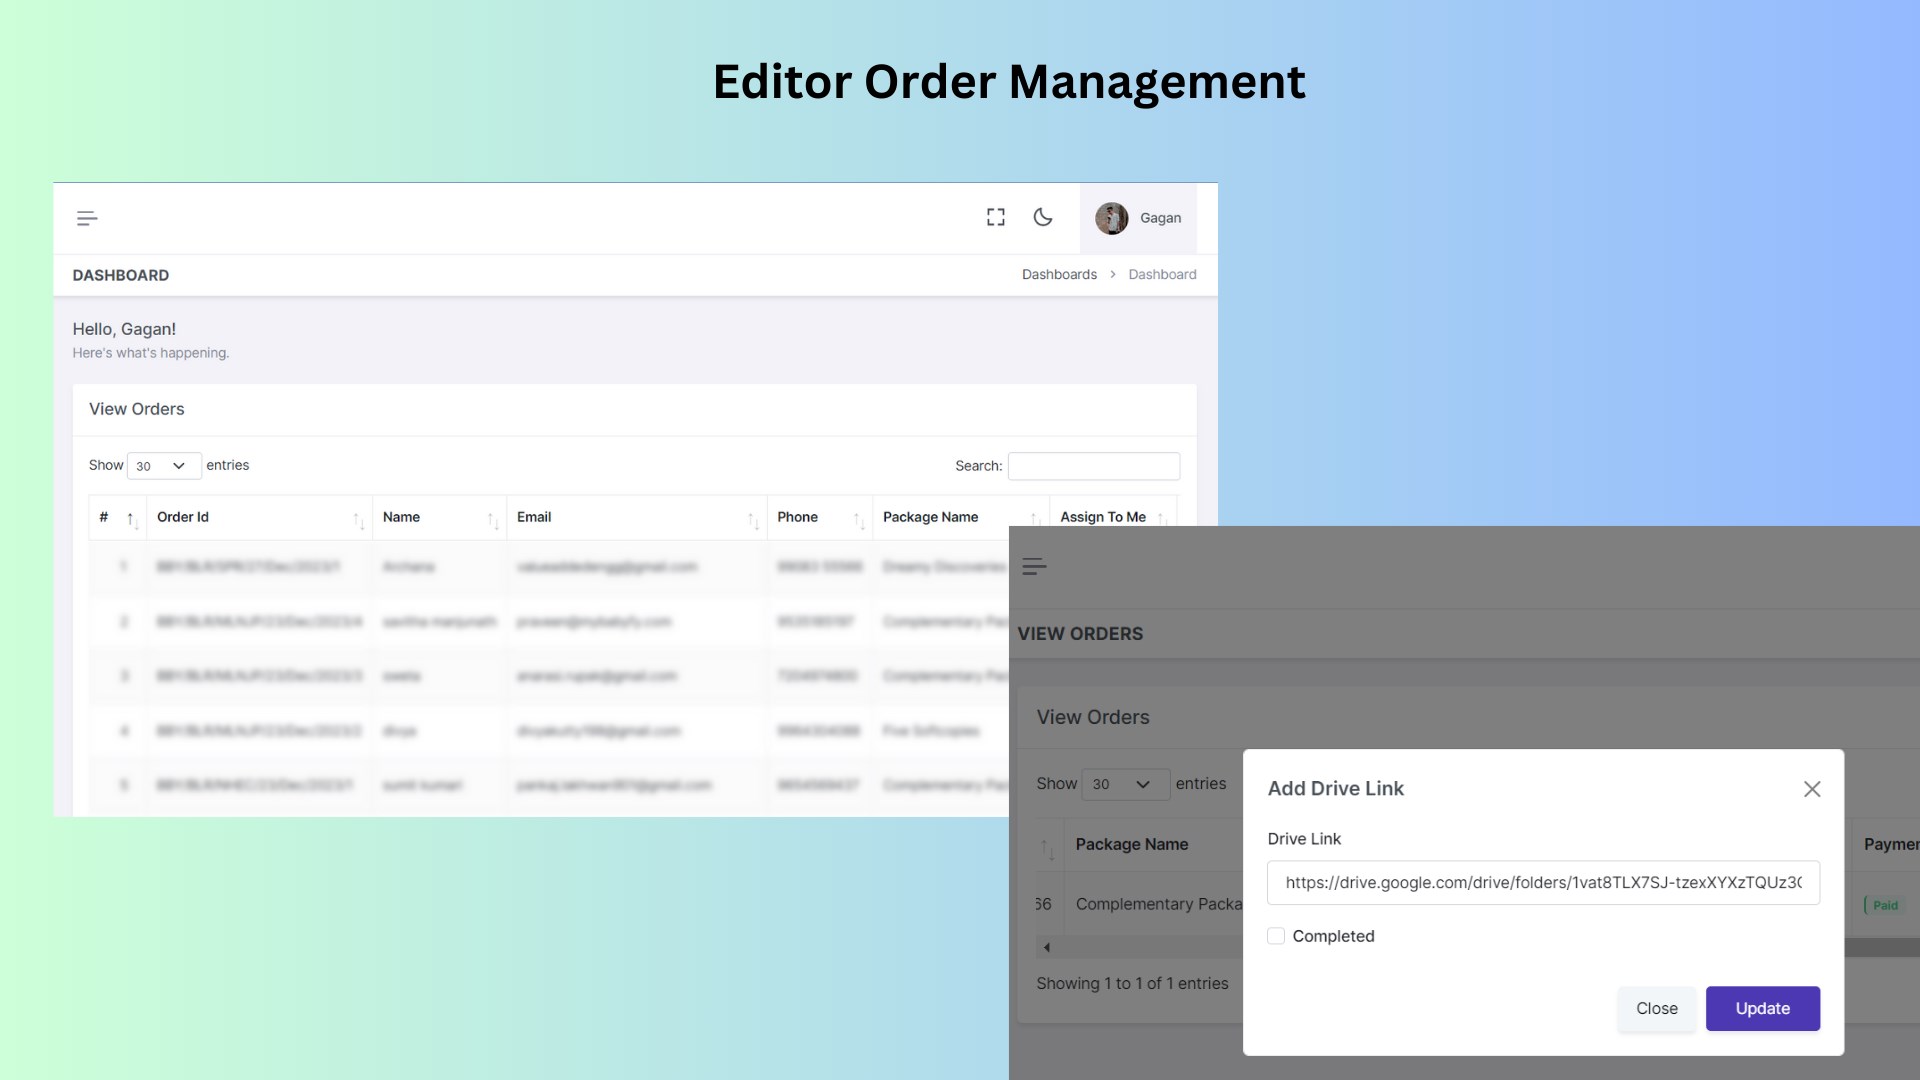 Exclusive Editor dashboard with features to update orders, view and manage assigned orders, and the option to self-assign orders.